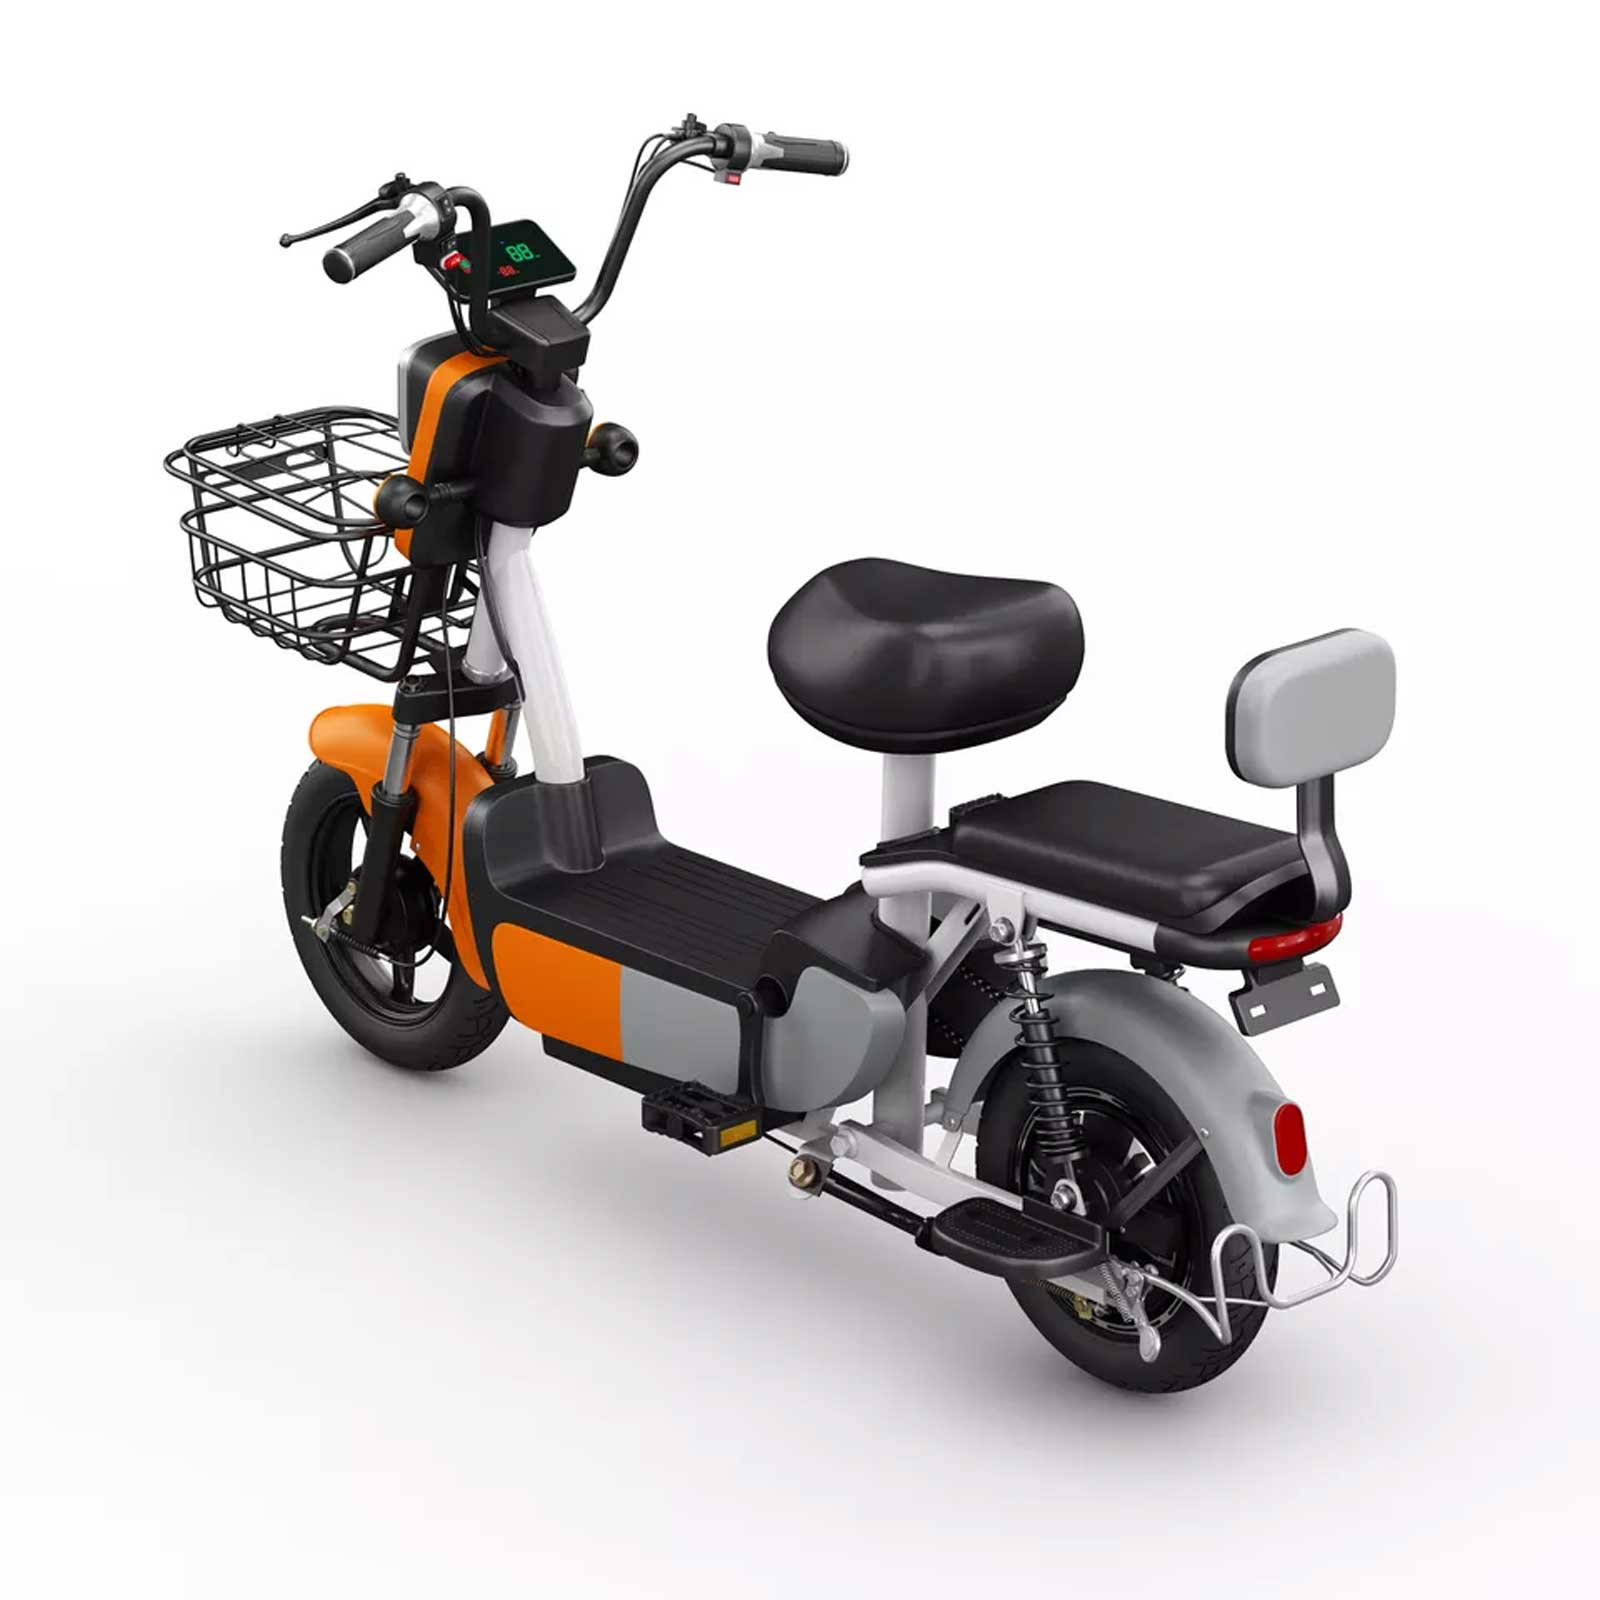 Electric moped 2 seater scooter 48v battery  orange grey